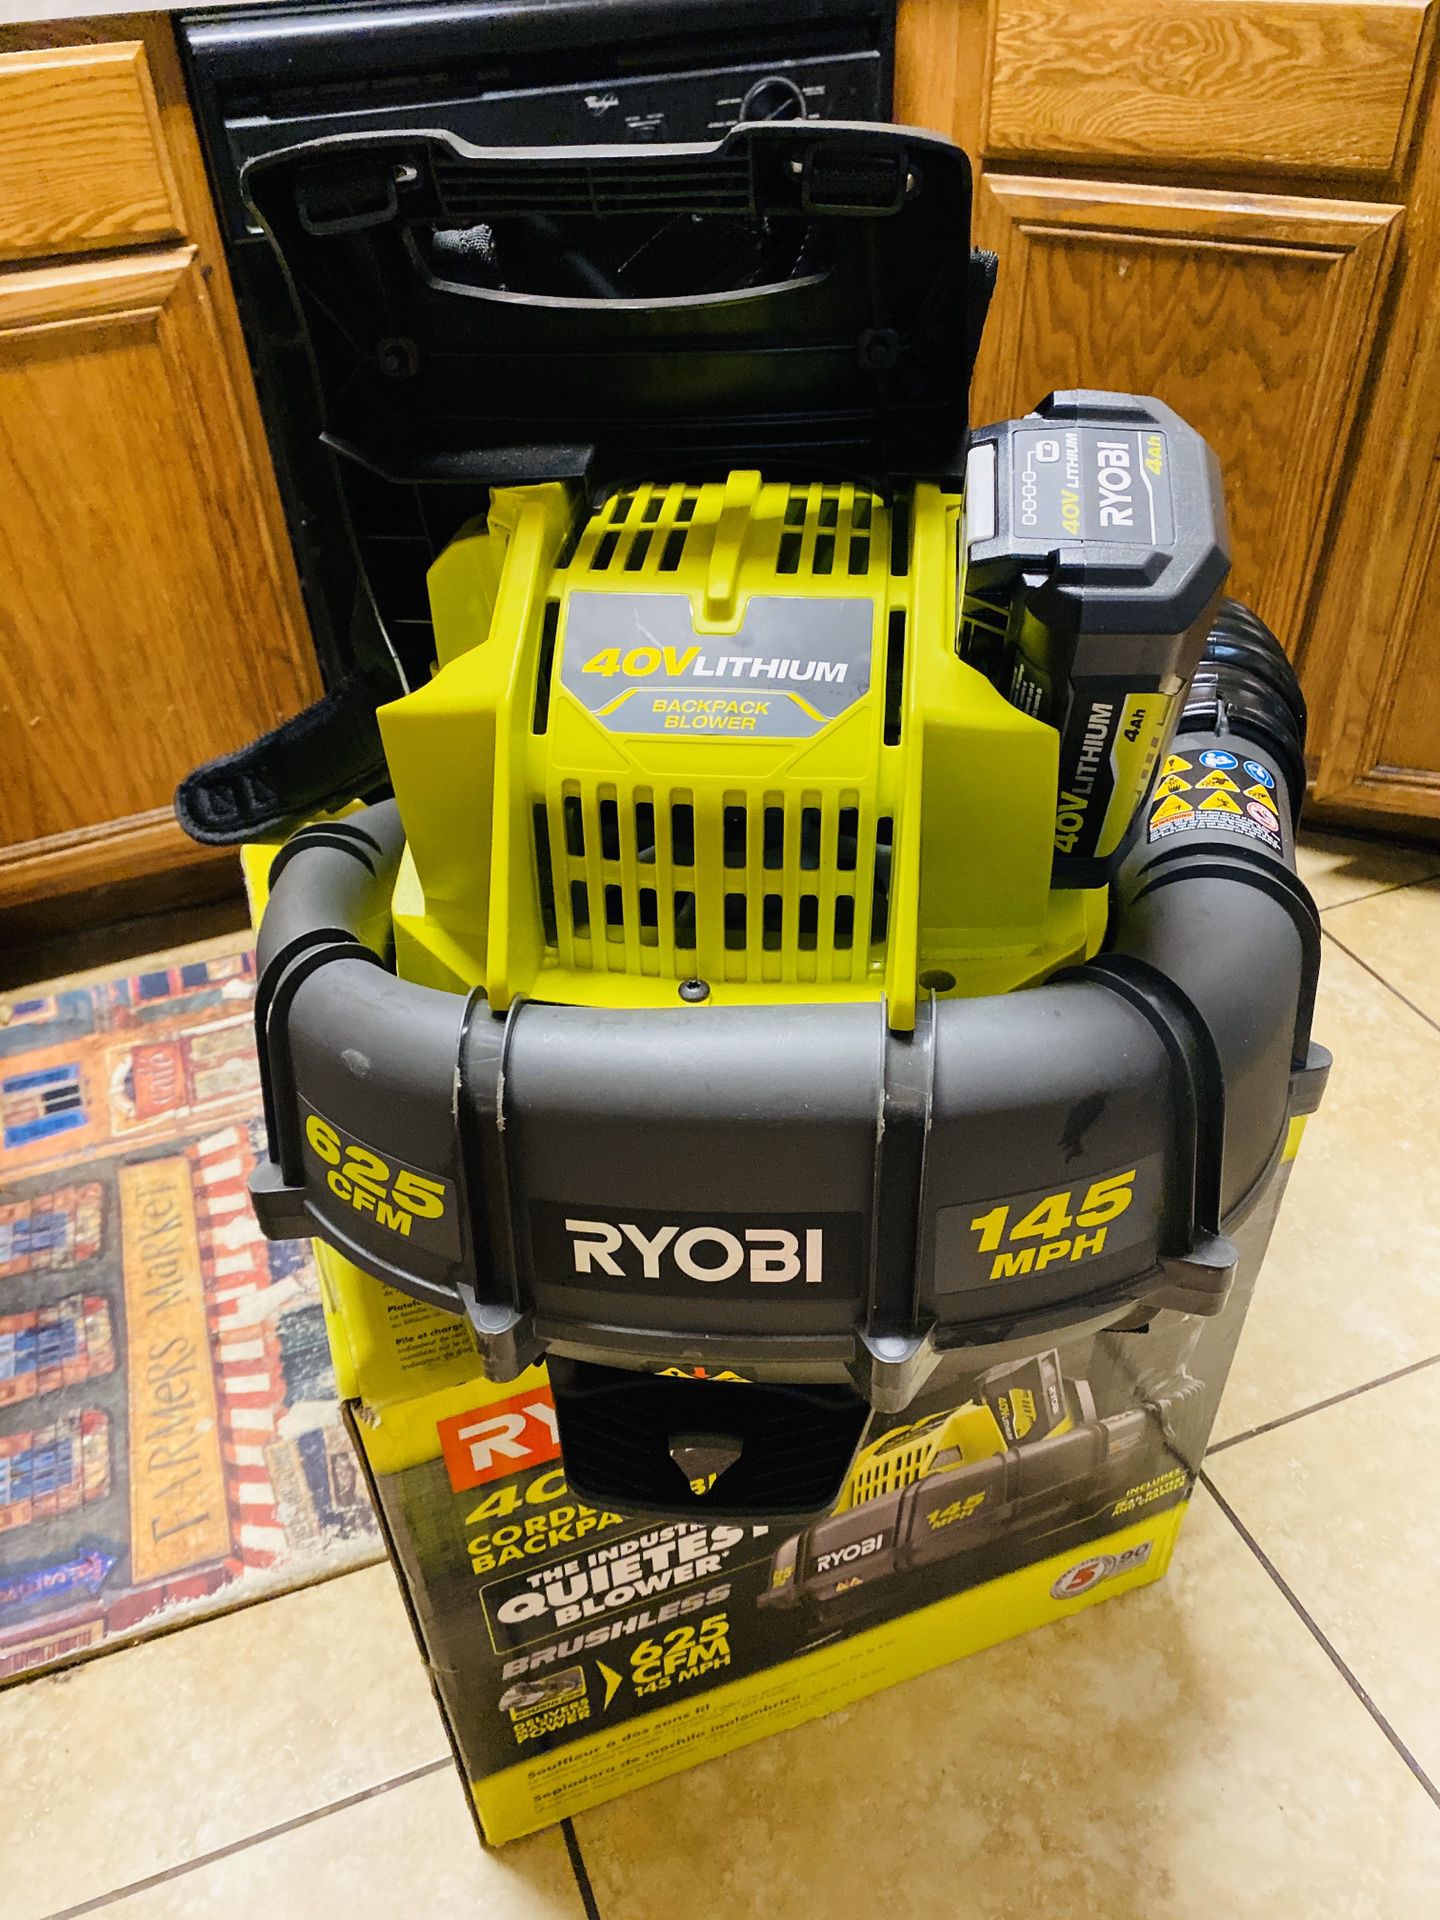 RYOBI 145 MPH 625 CFM 40-Volt Lithium-Ion Cordless Backpack Blower 5 Ah Battery and Charger Included